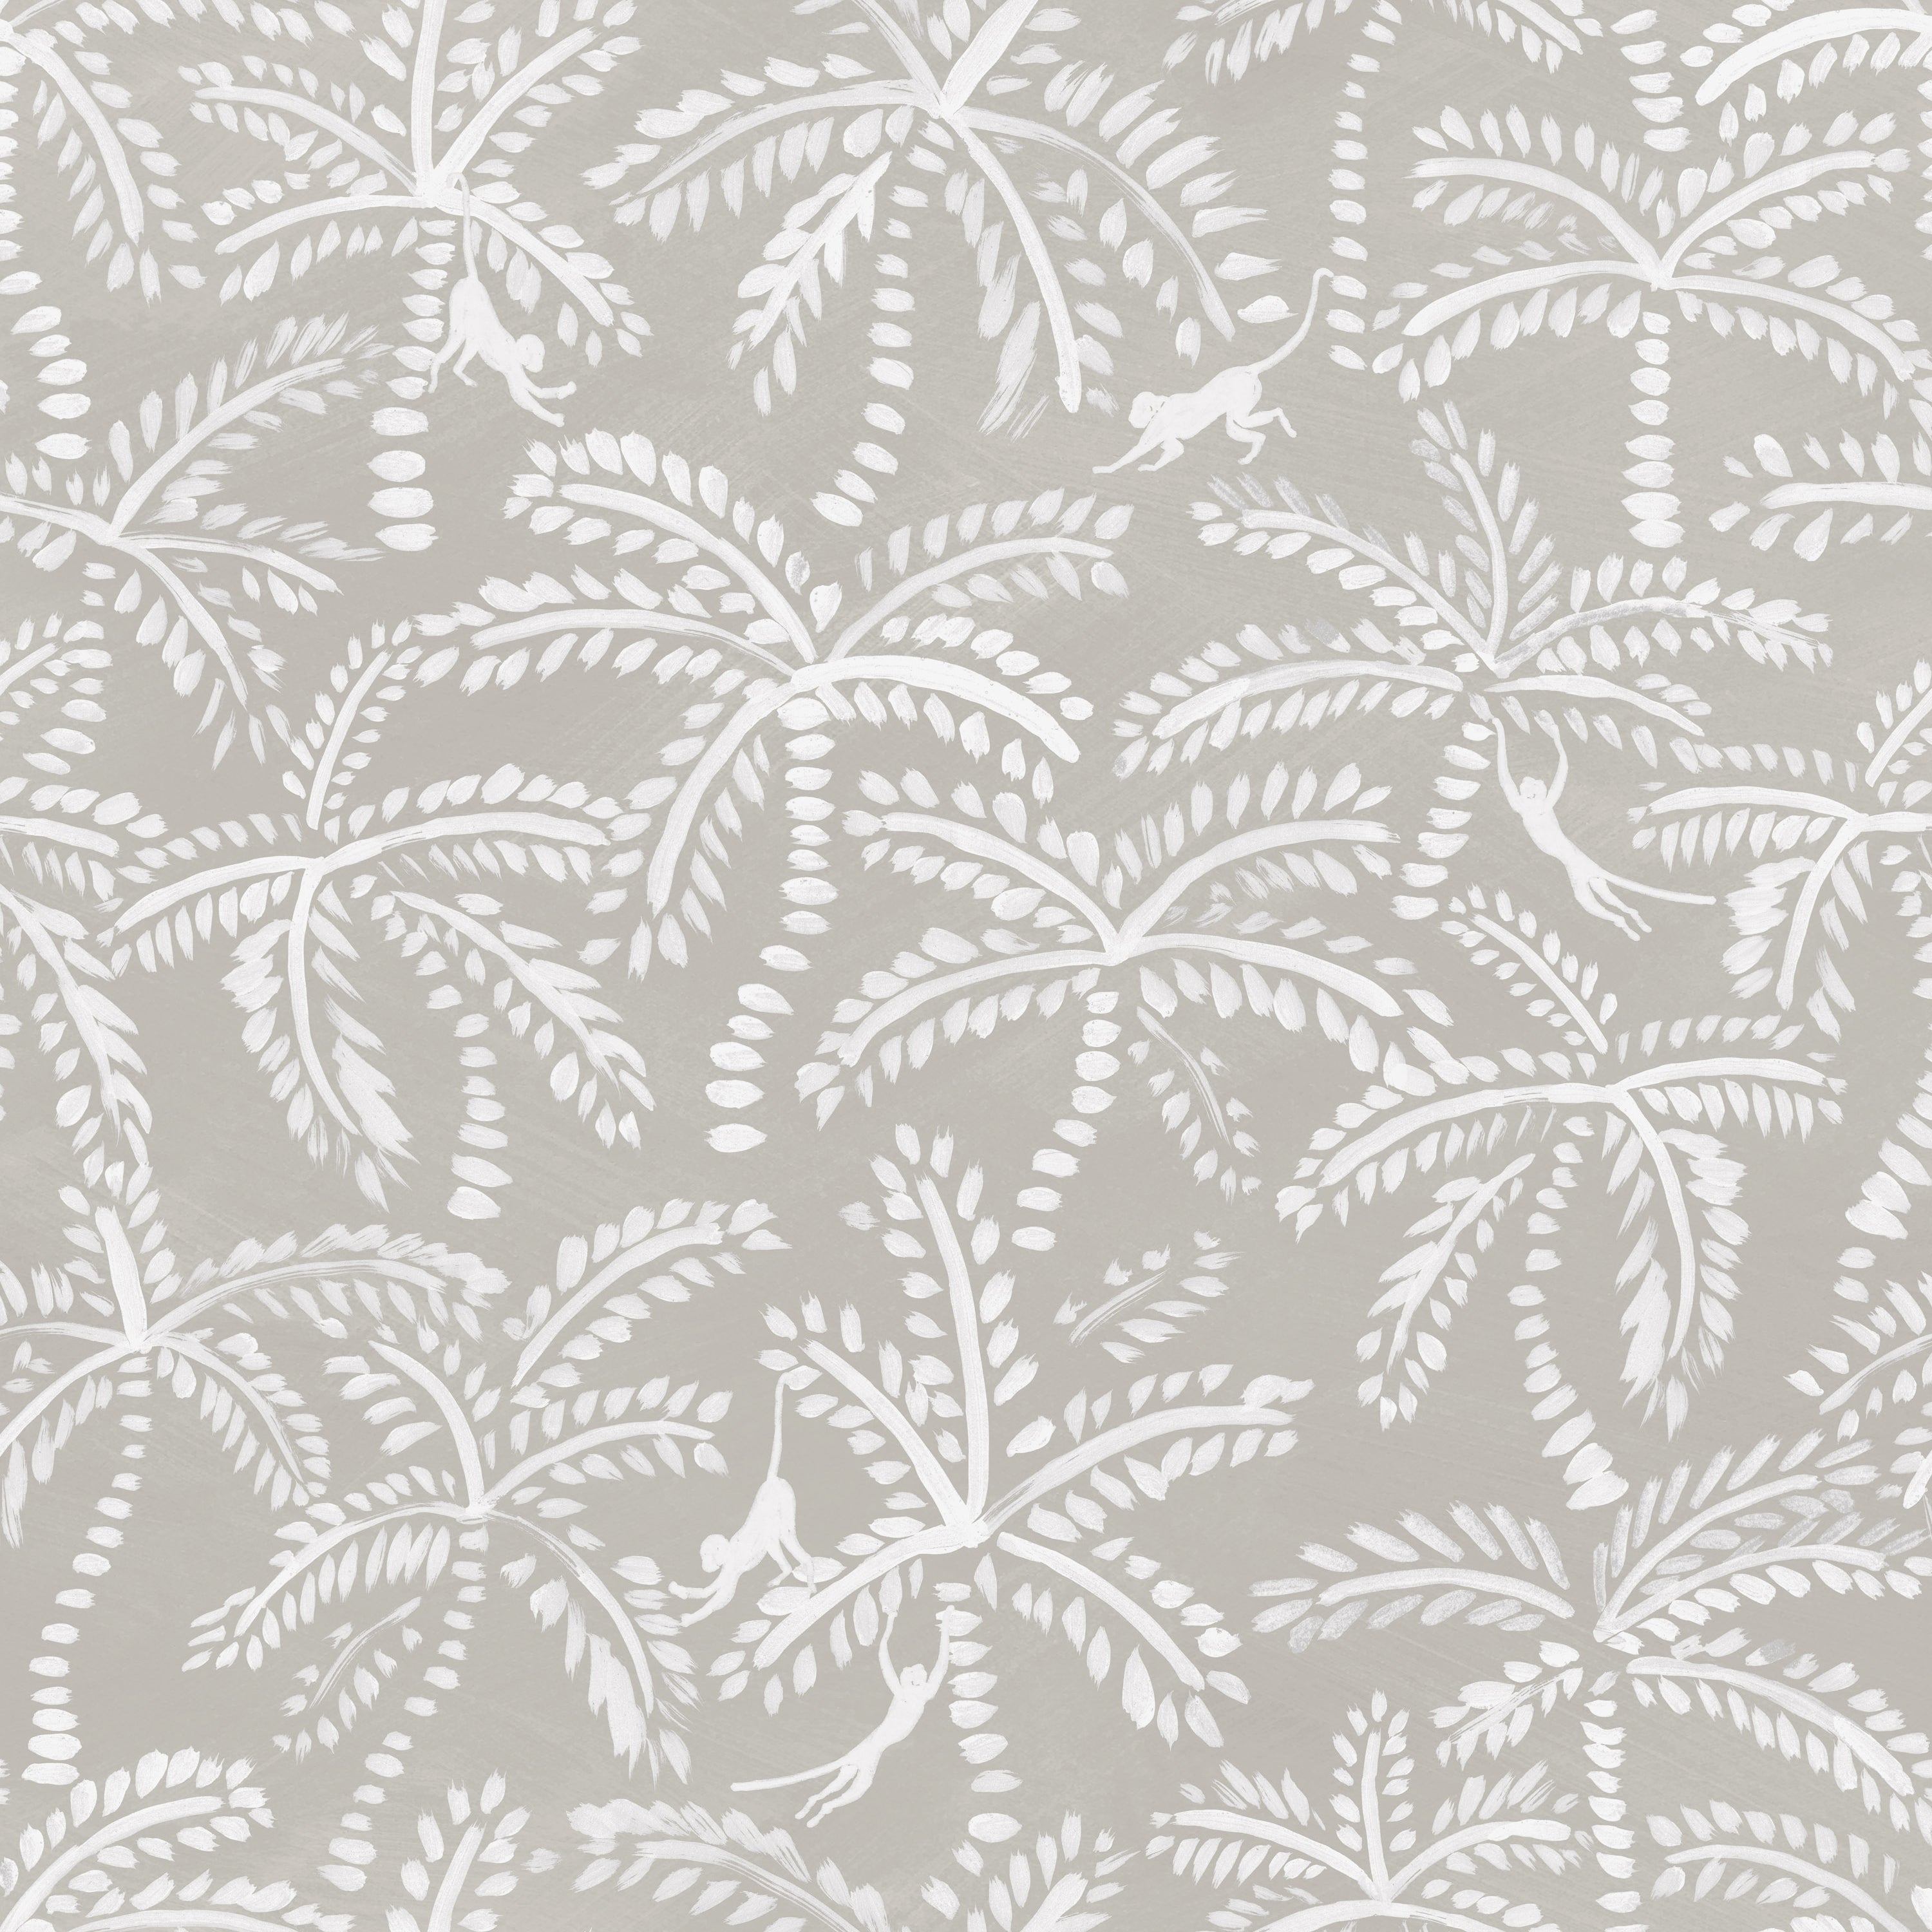 Detail of fabric in a playful palm tree and monkey print in white on a light gray field.